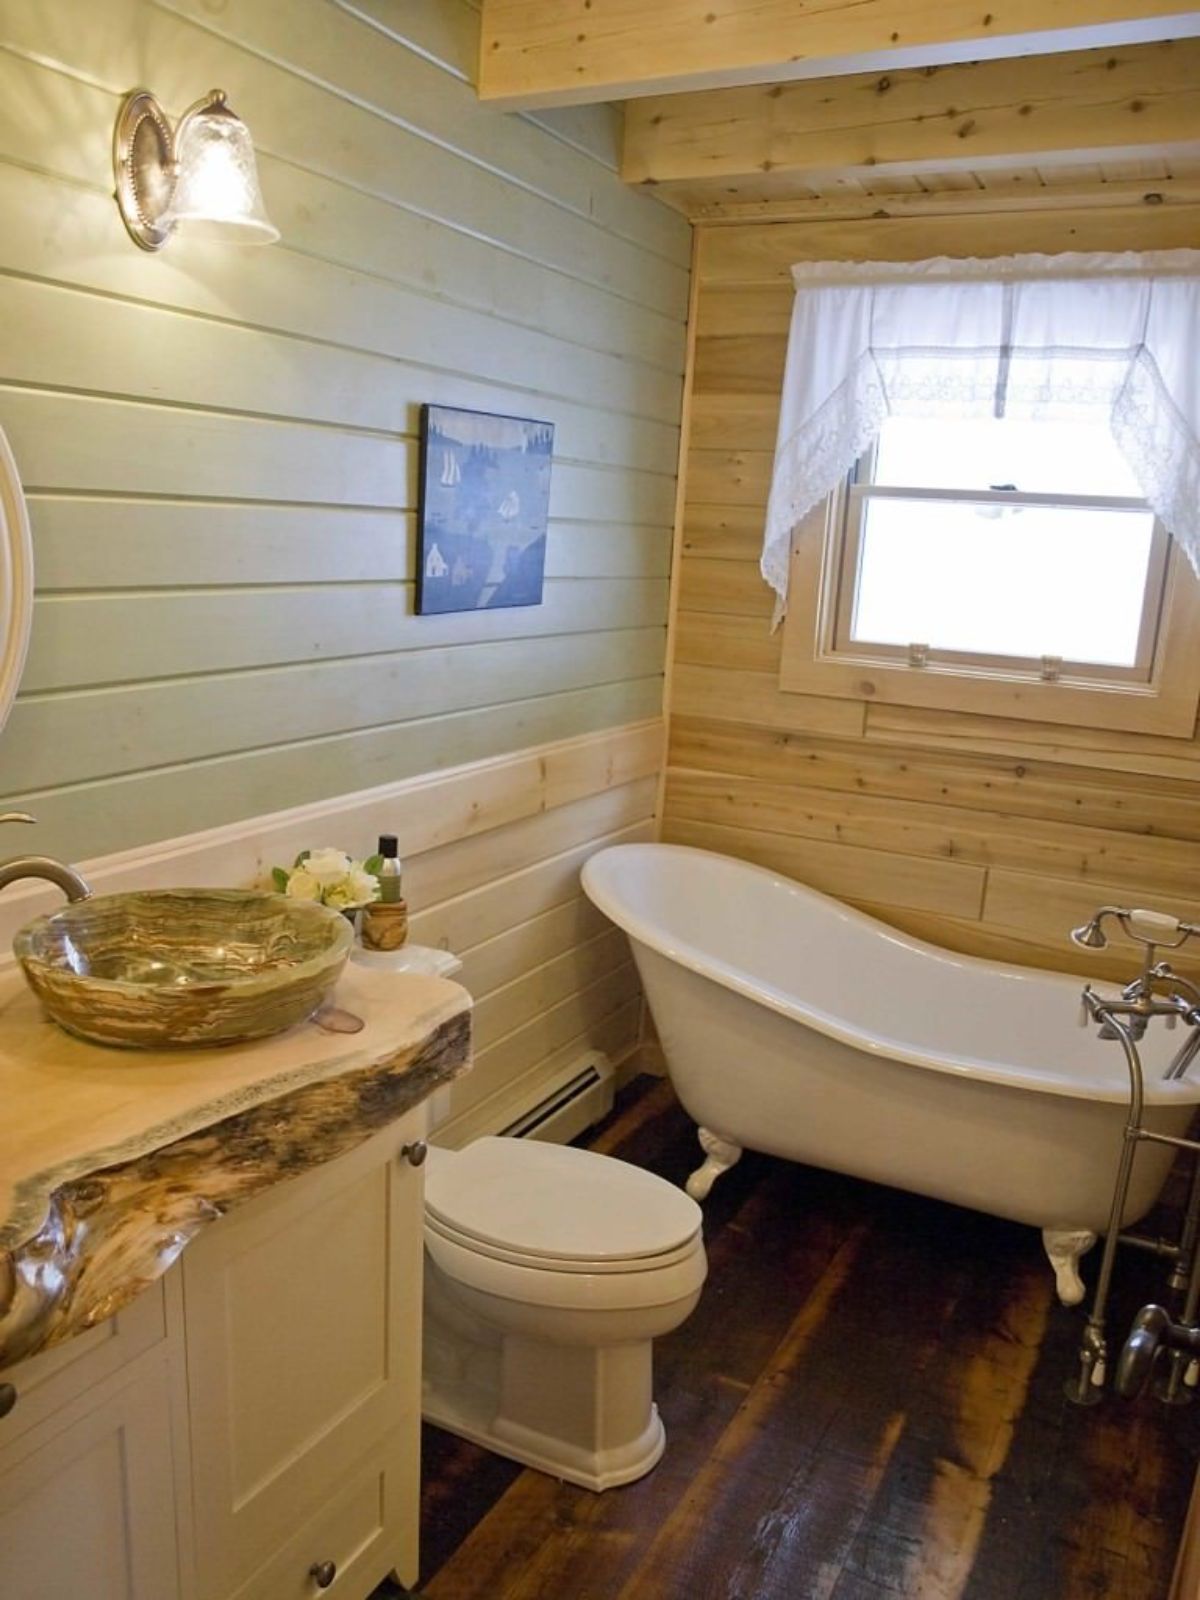 light green walls above light wood wainscotting in bathroom with white soaker tub in corner